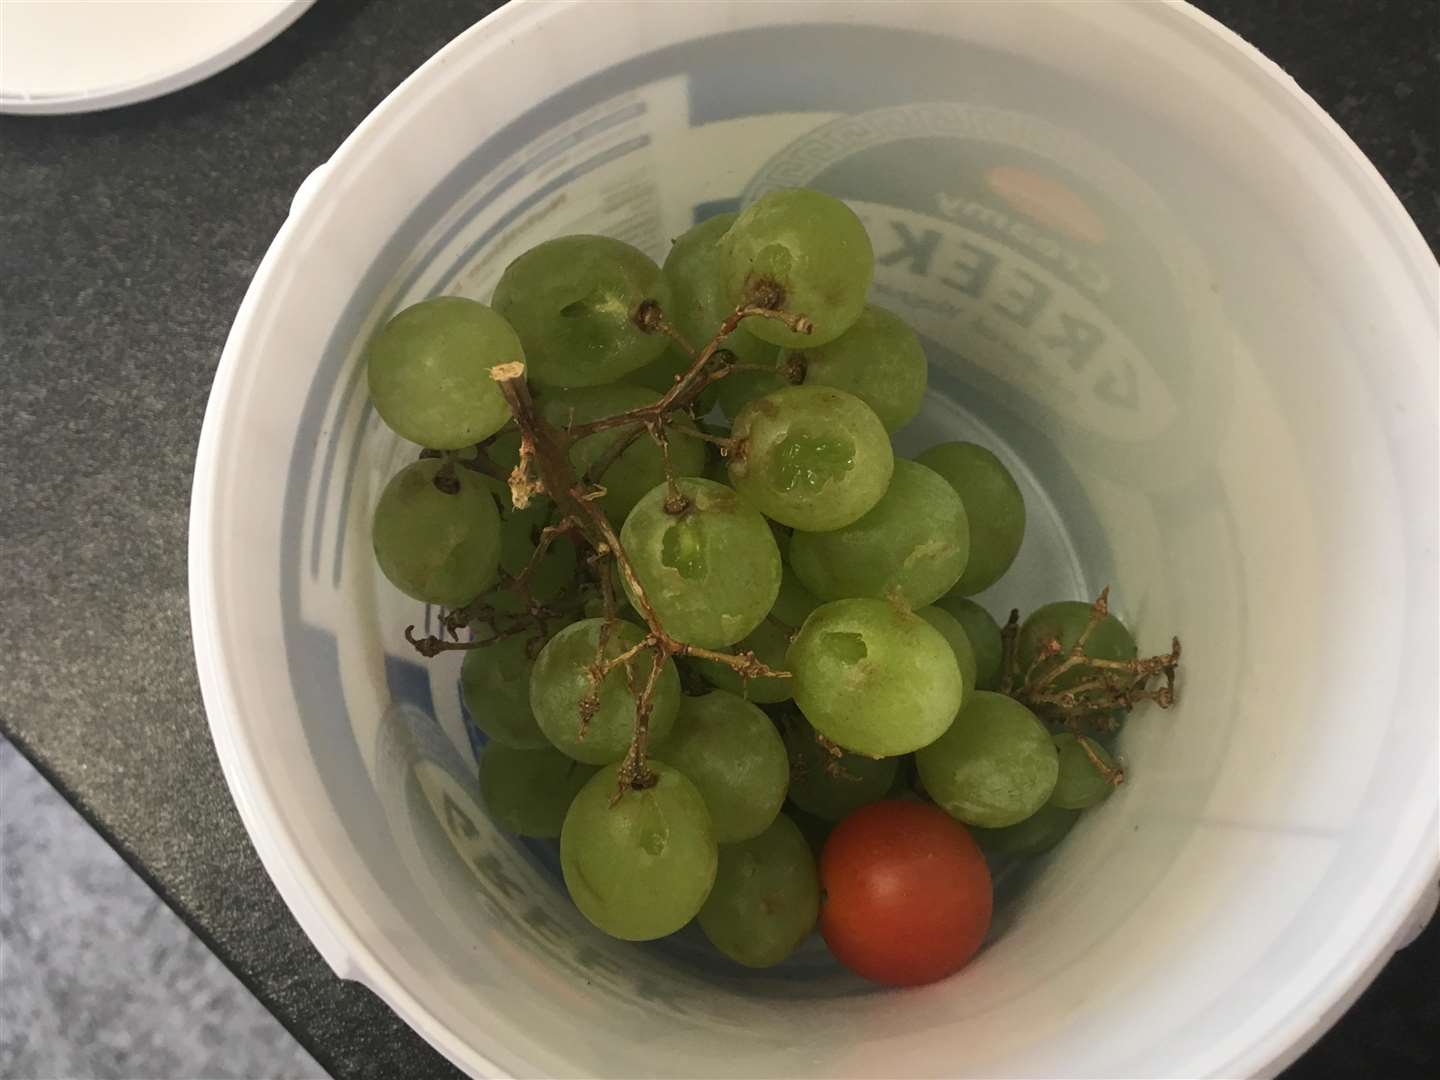 Grapes were found to have been gnawed at in one of the flats (2631920)